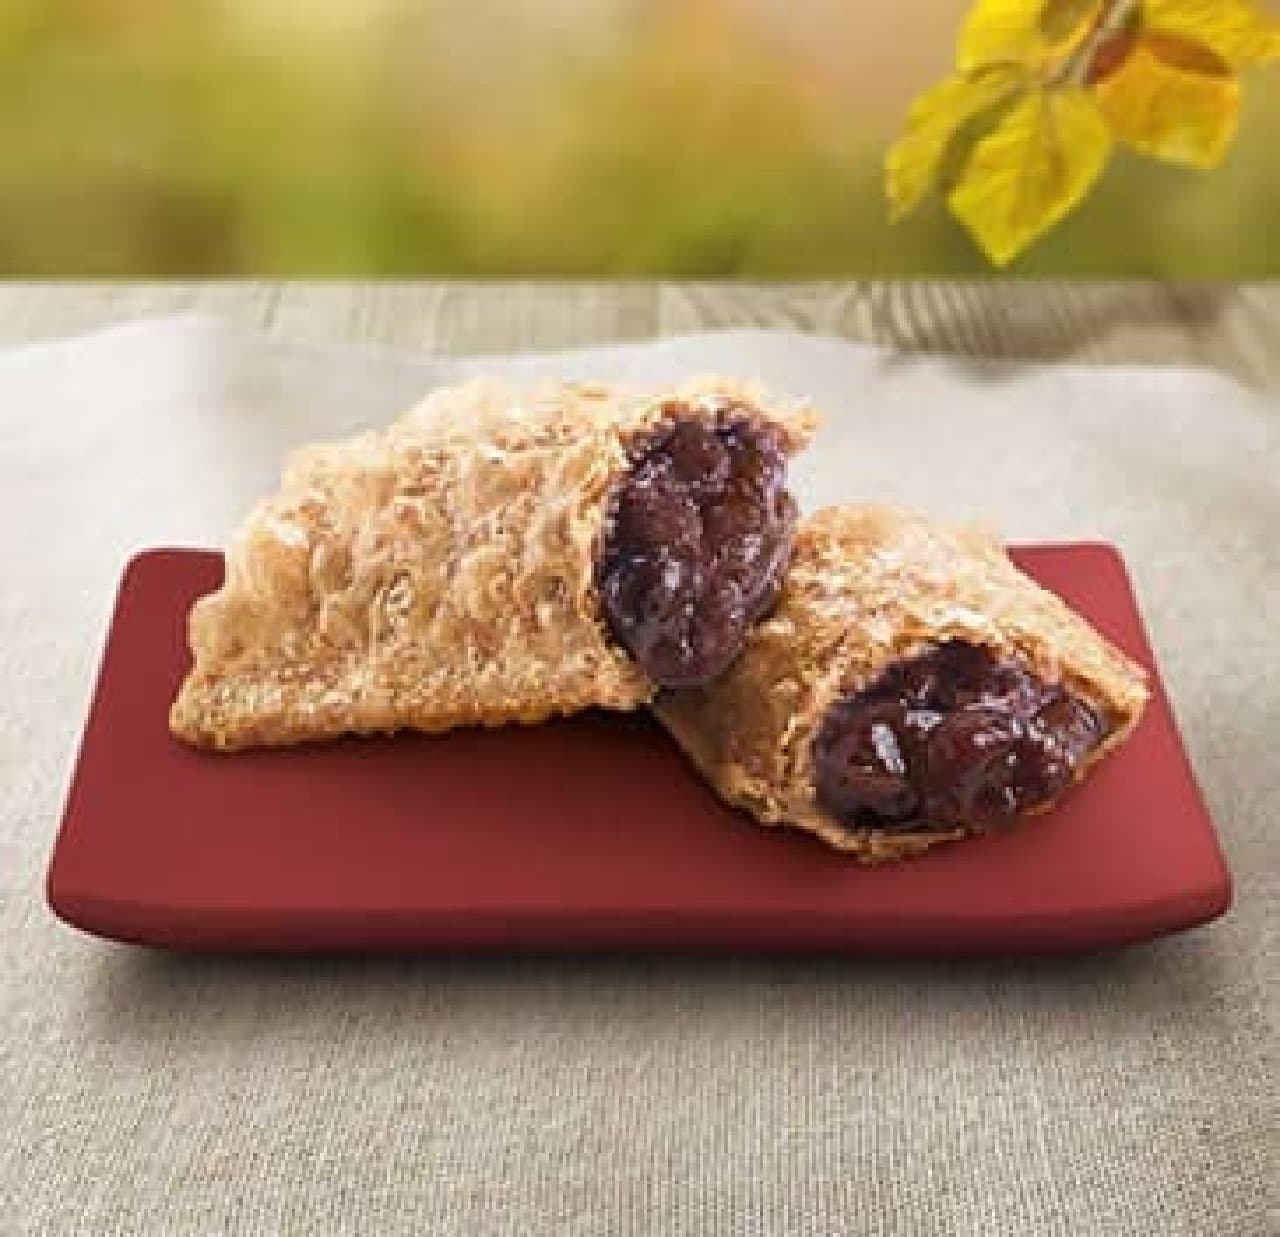 Anko pie from McDonald's for 100 yen this year!